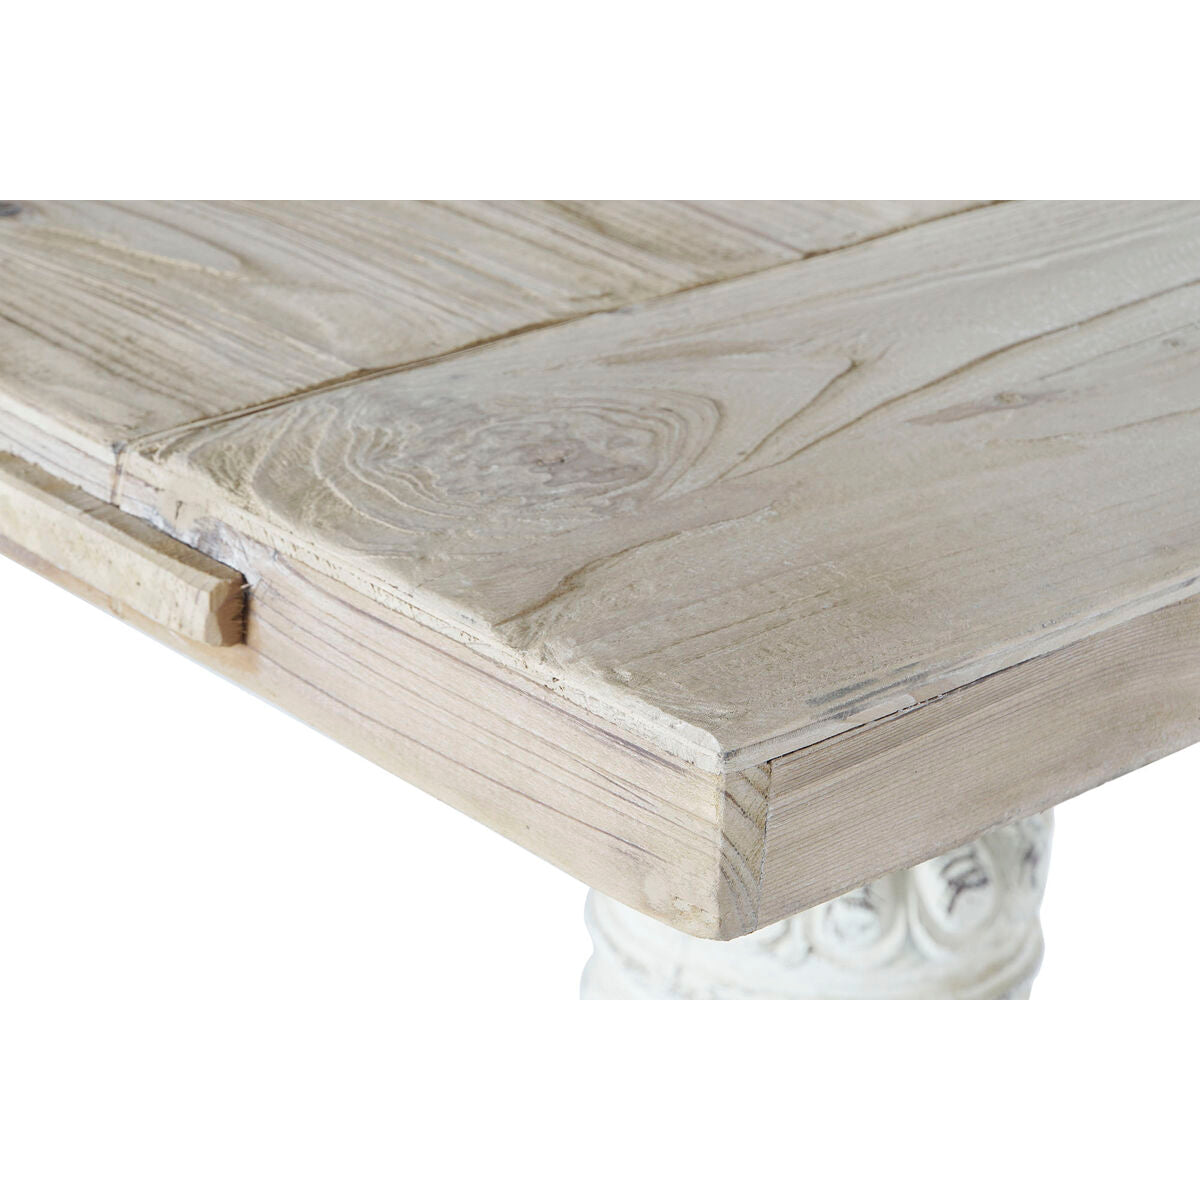 Dining Table DKD Home Decor White Natural Fir 200 x 90 x 78 cm